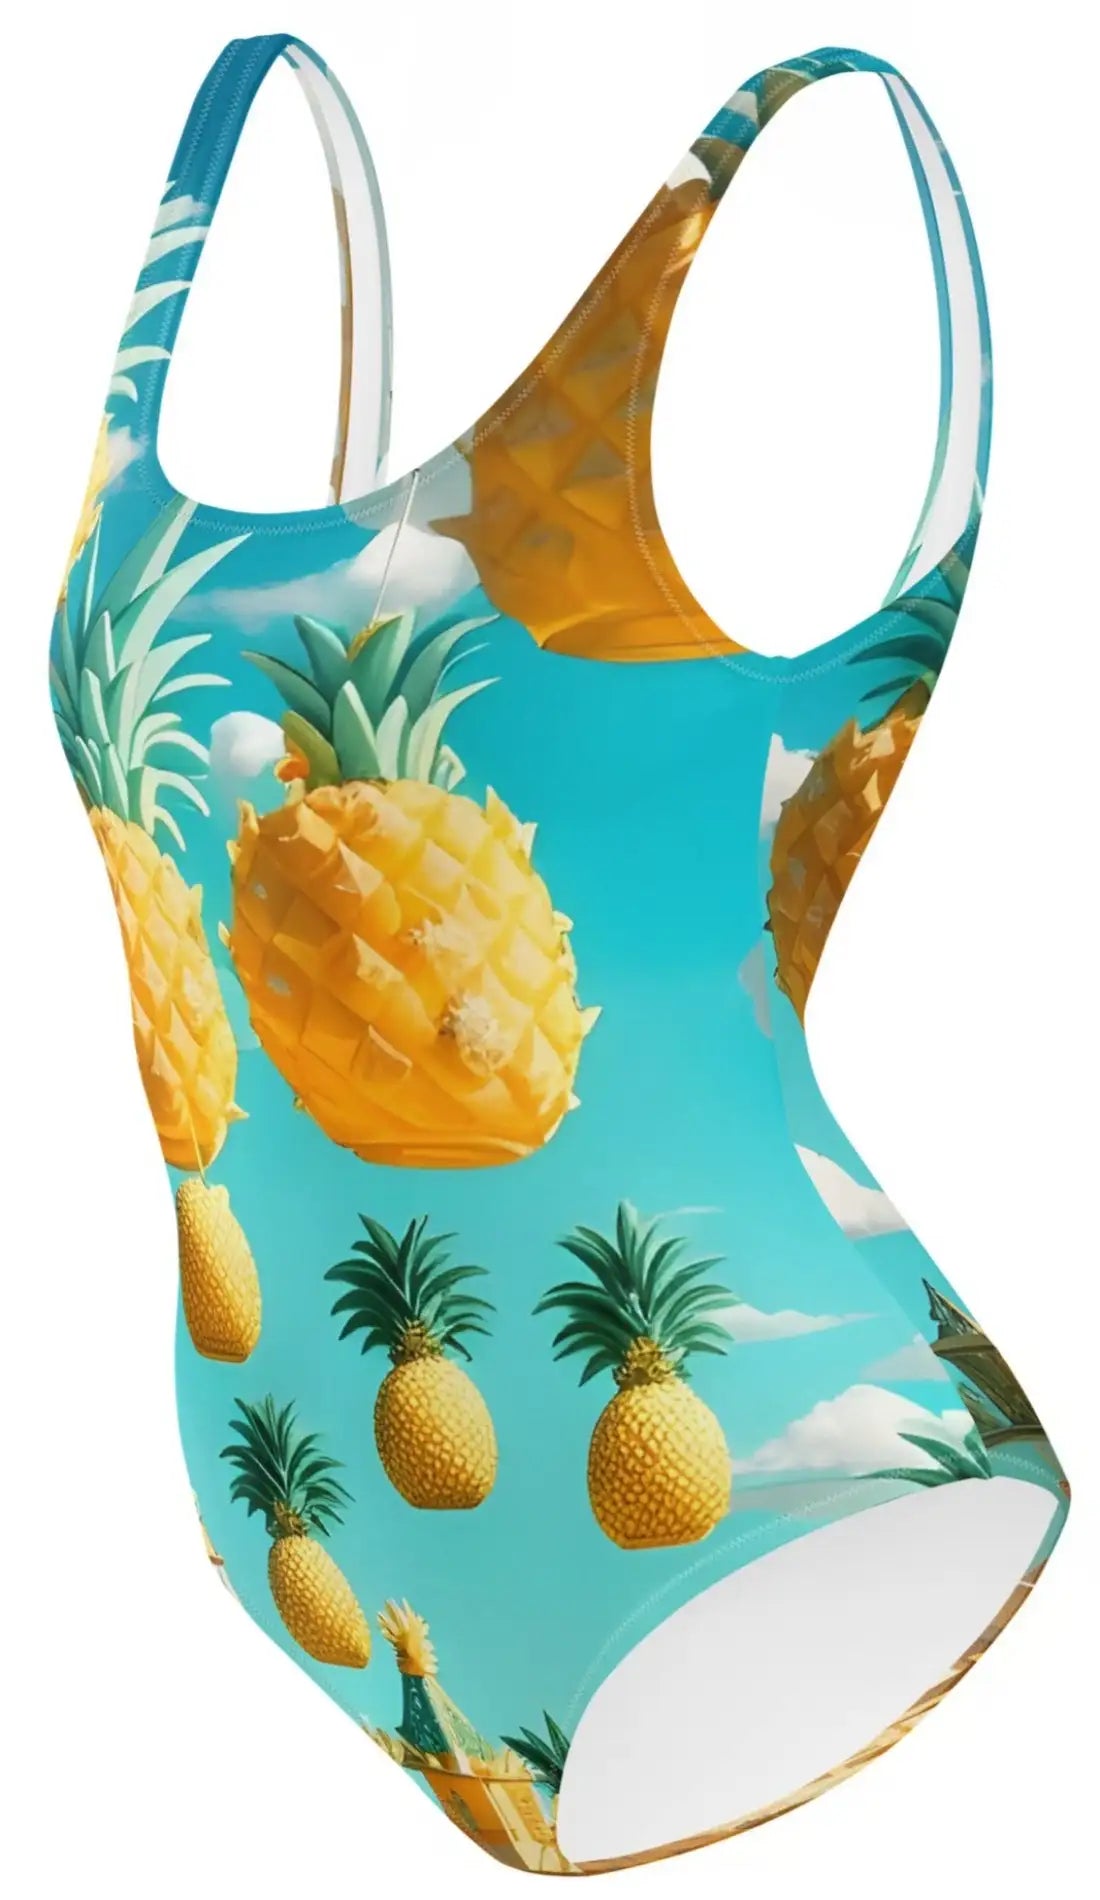 Pineapple Paradise: Surreal One-Piece Swimsuit with Whimsical Village